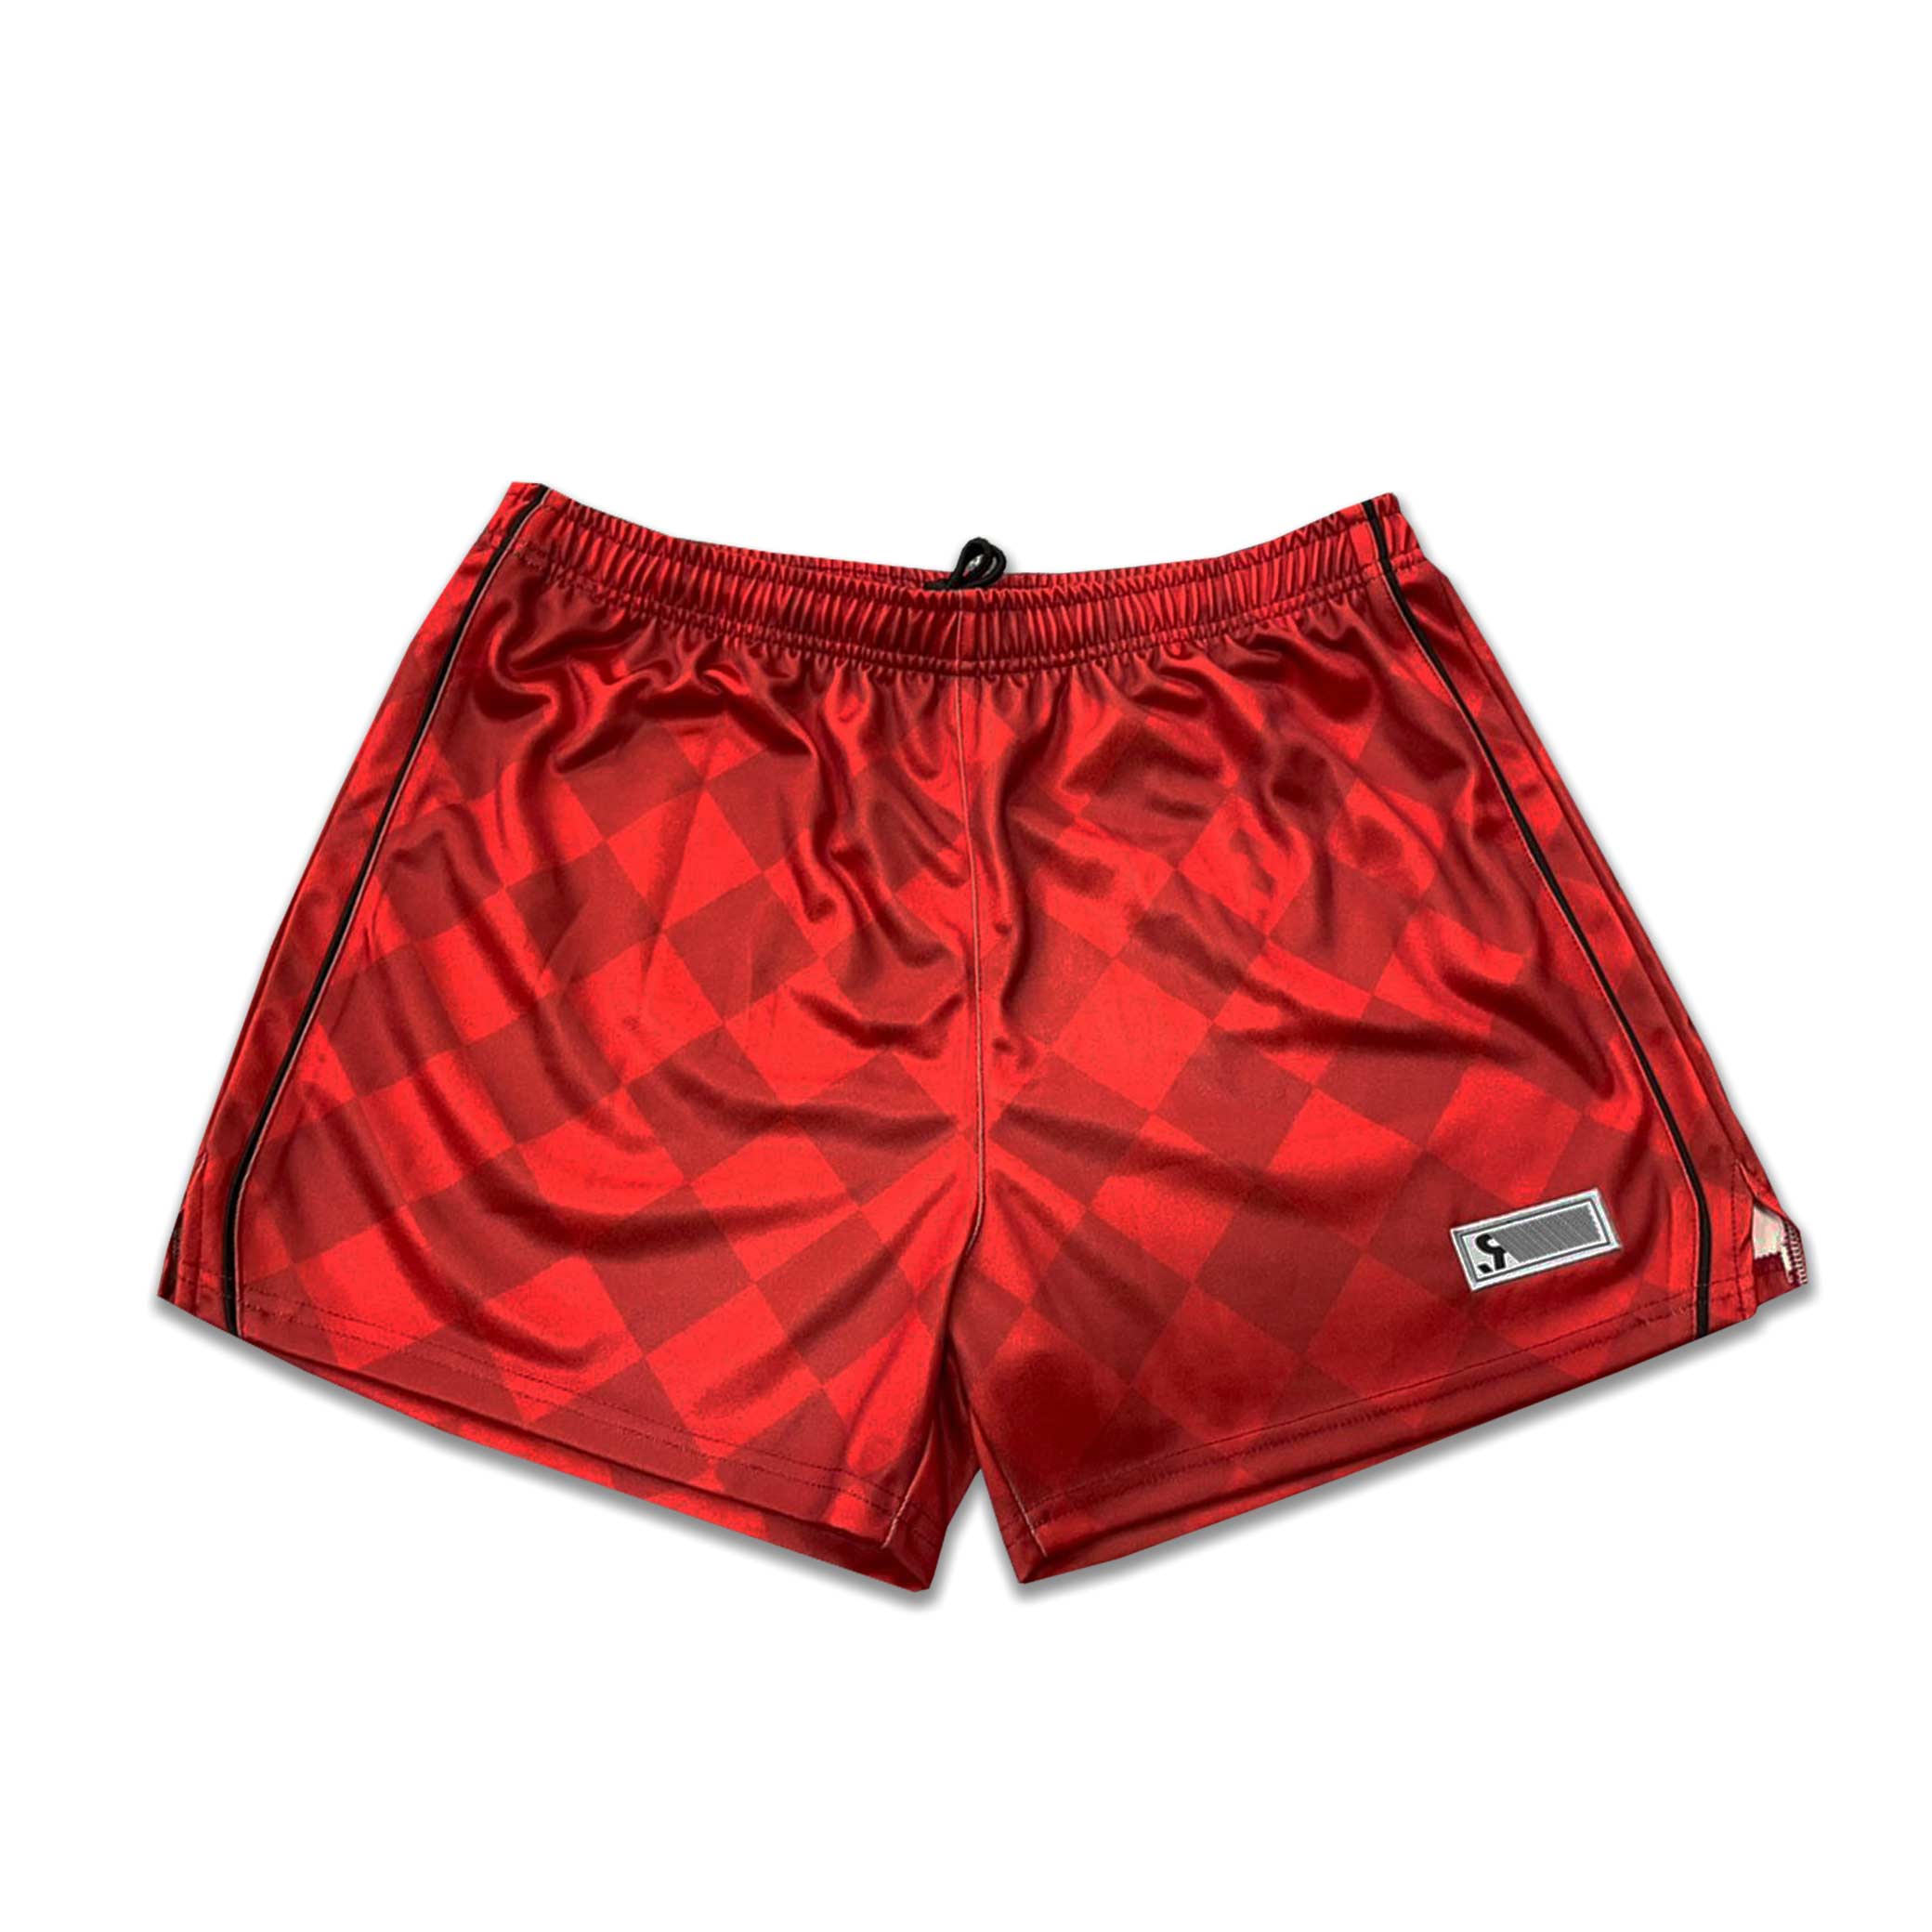 'Half Time' Match Day Shorts - Red Check